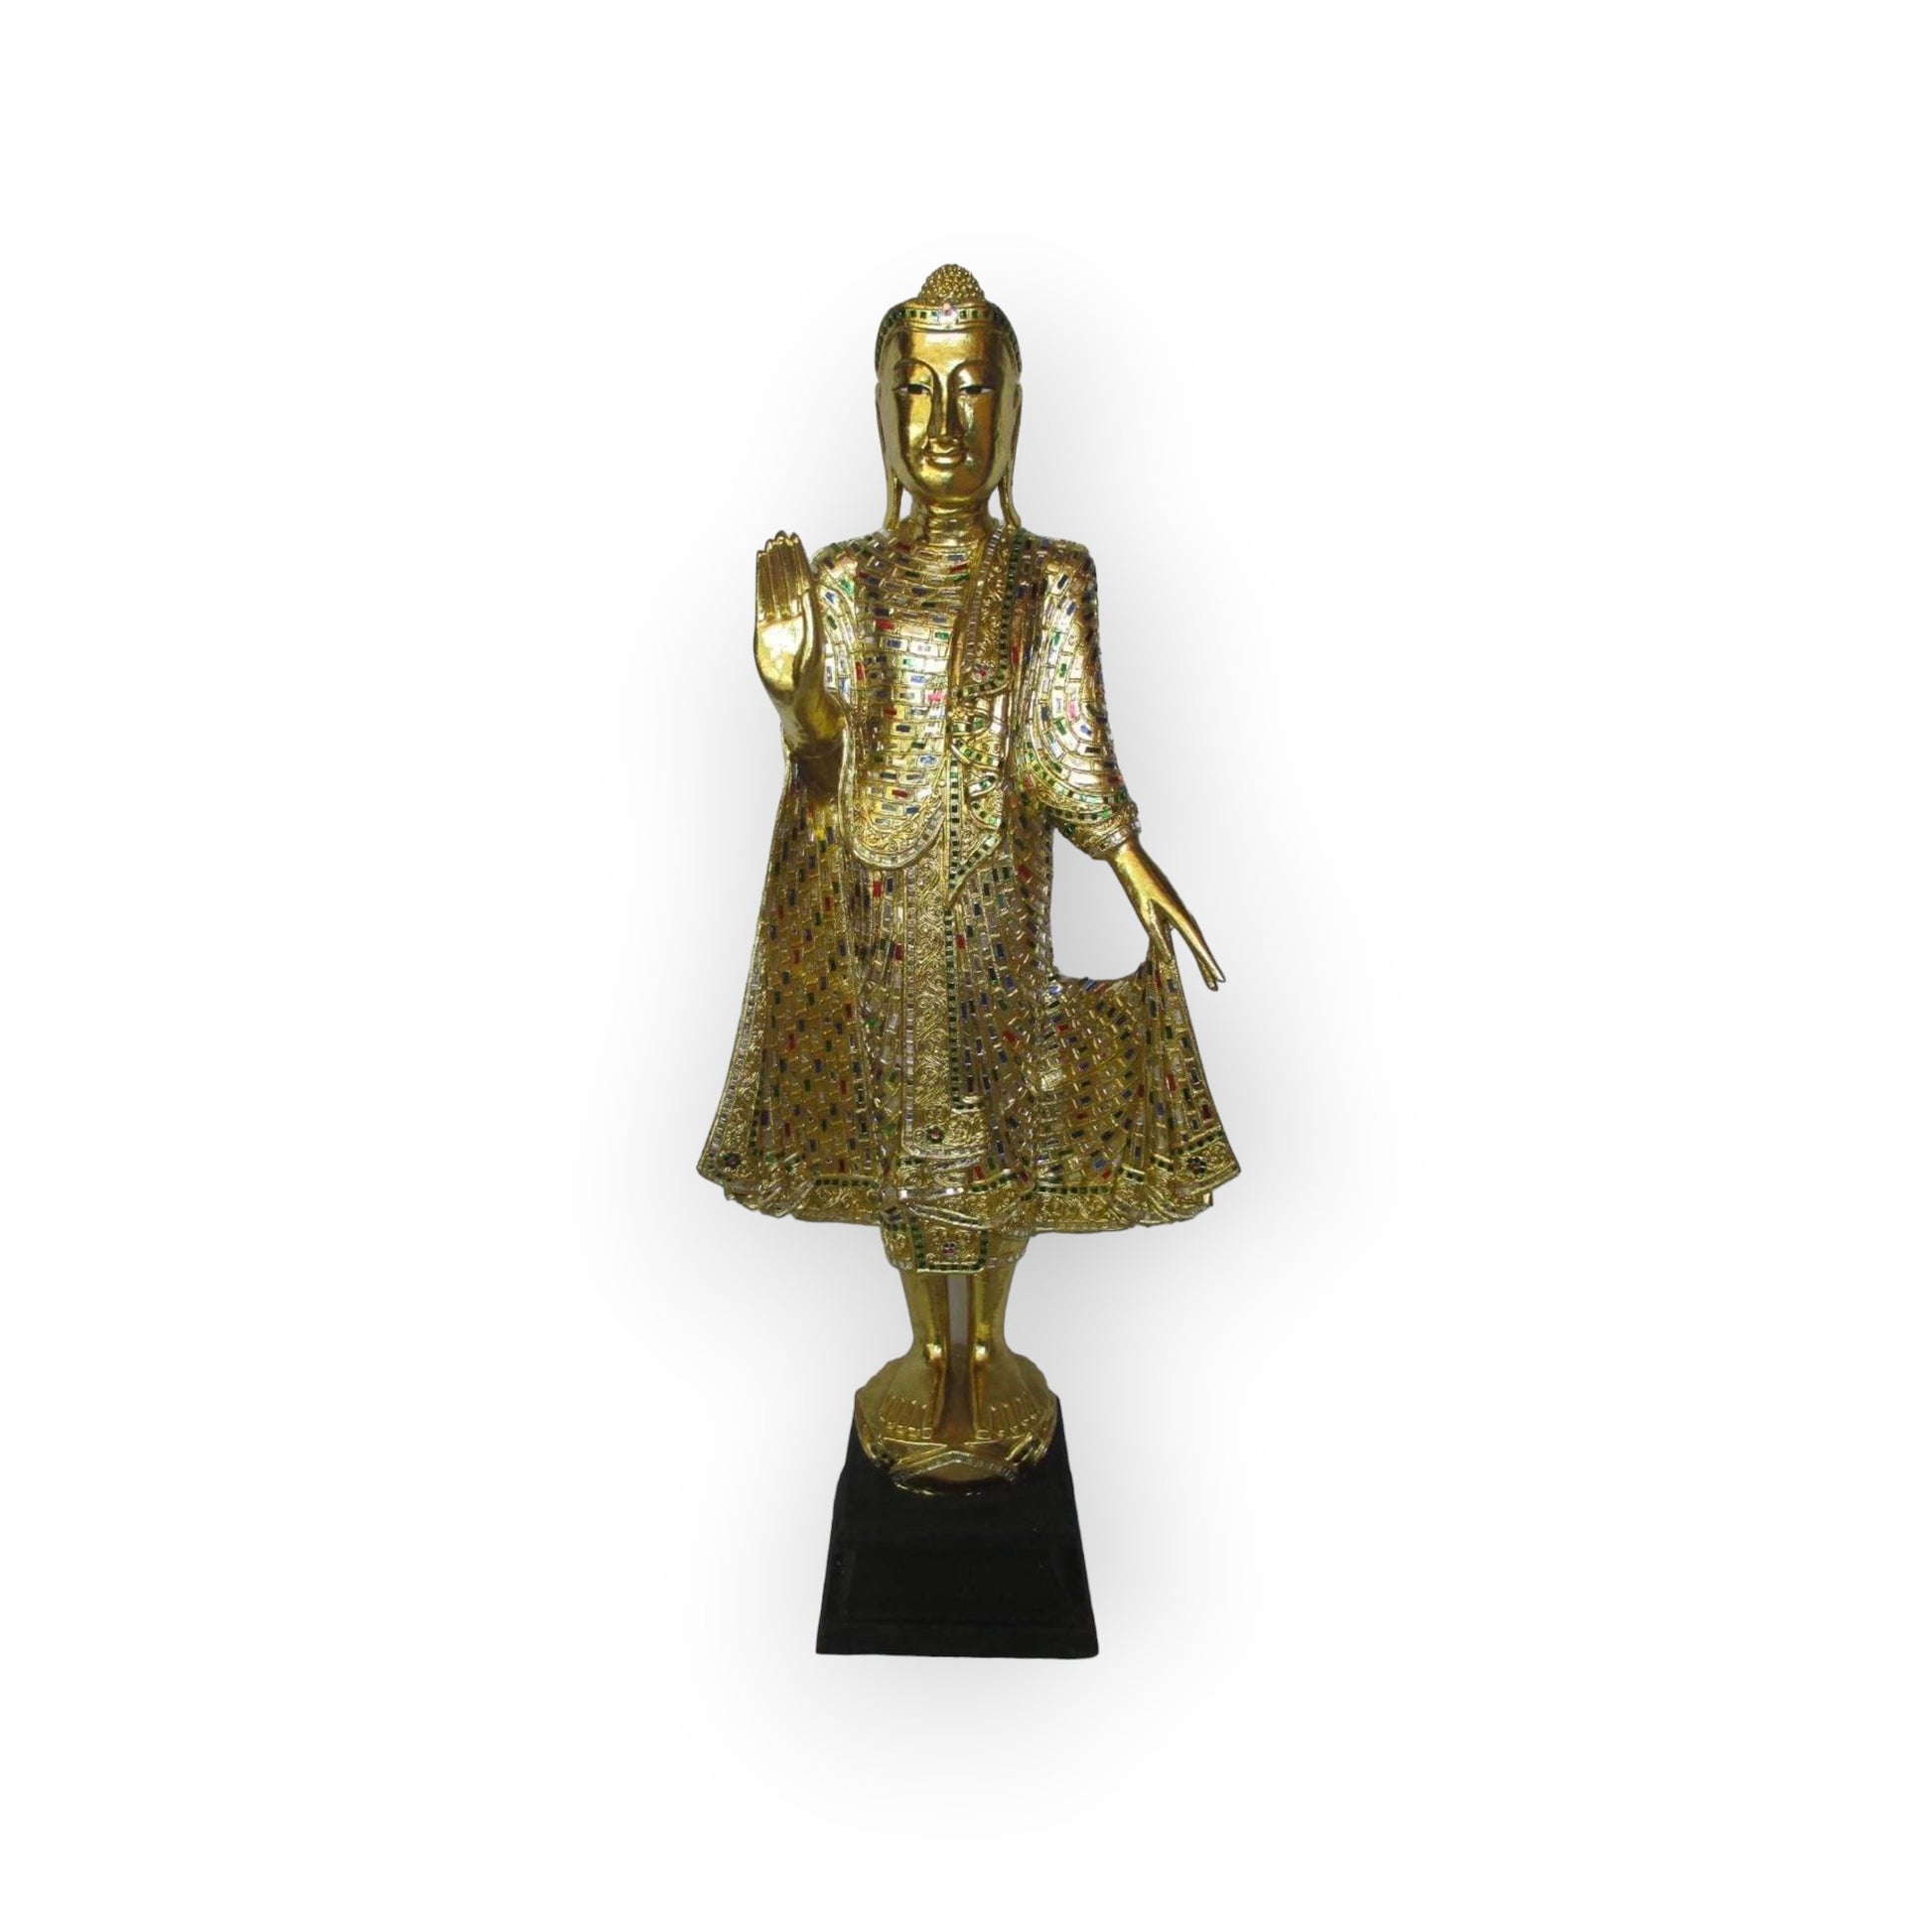 Standing Buddha Statue Gold Leaf 46" Tall One Palm Up